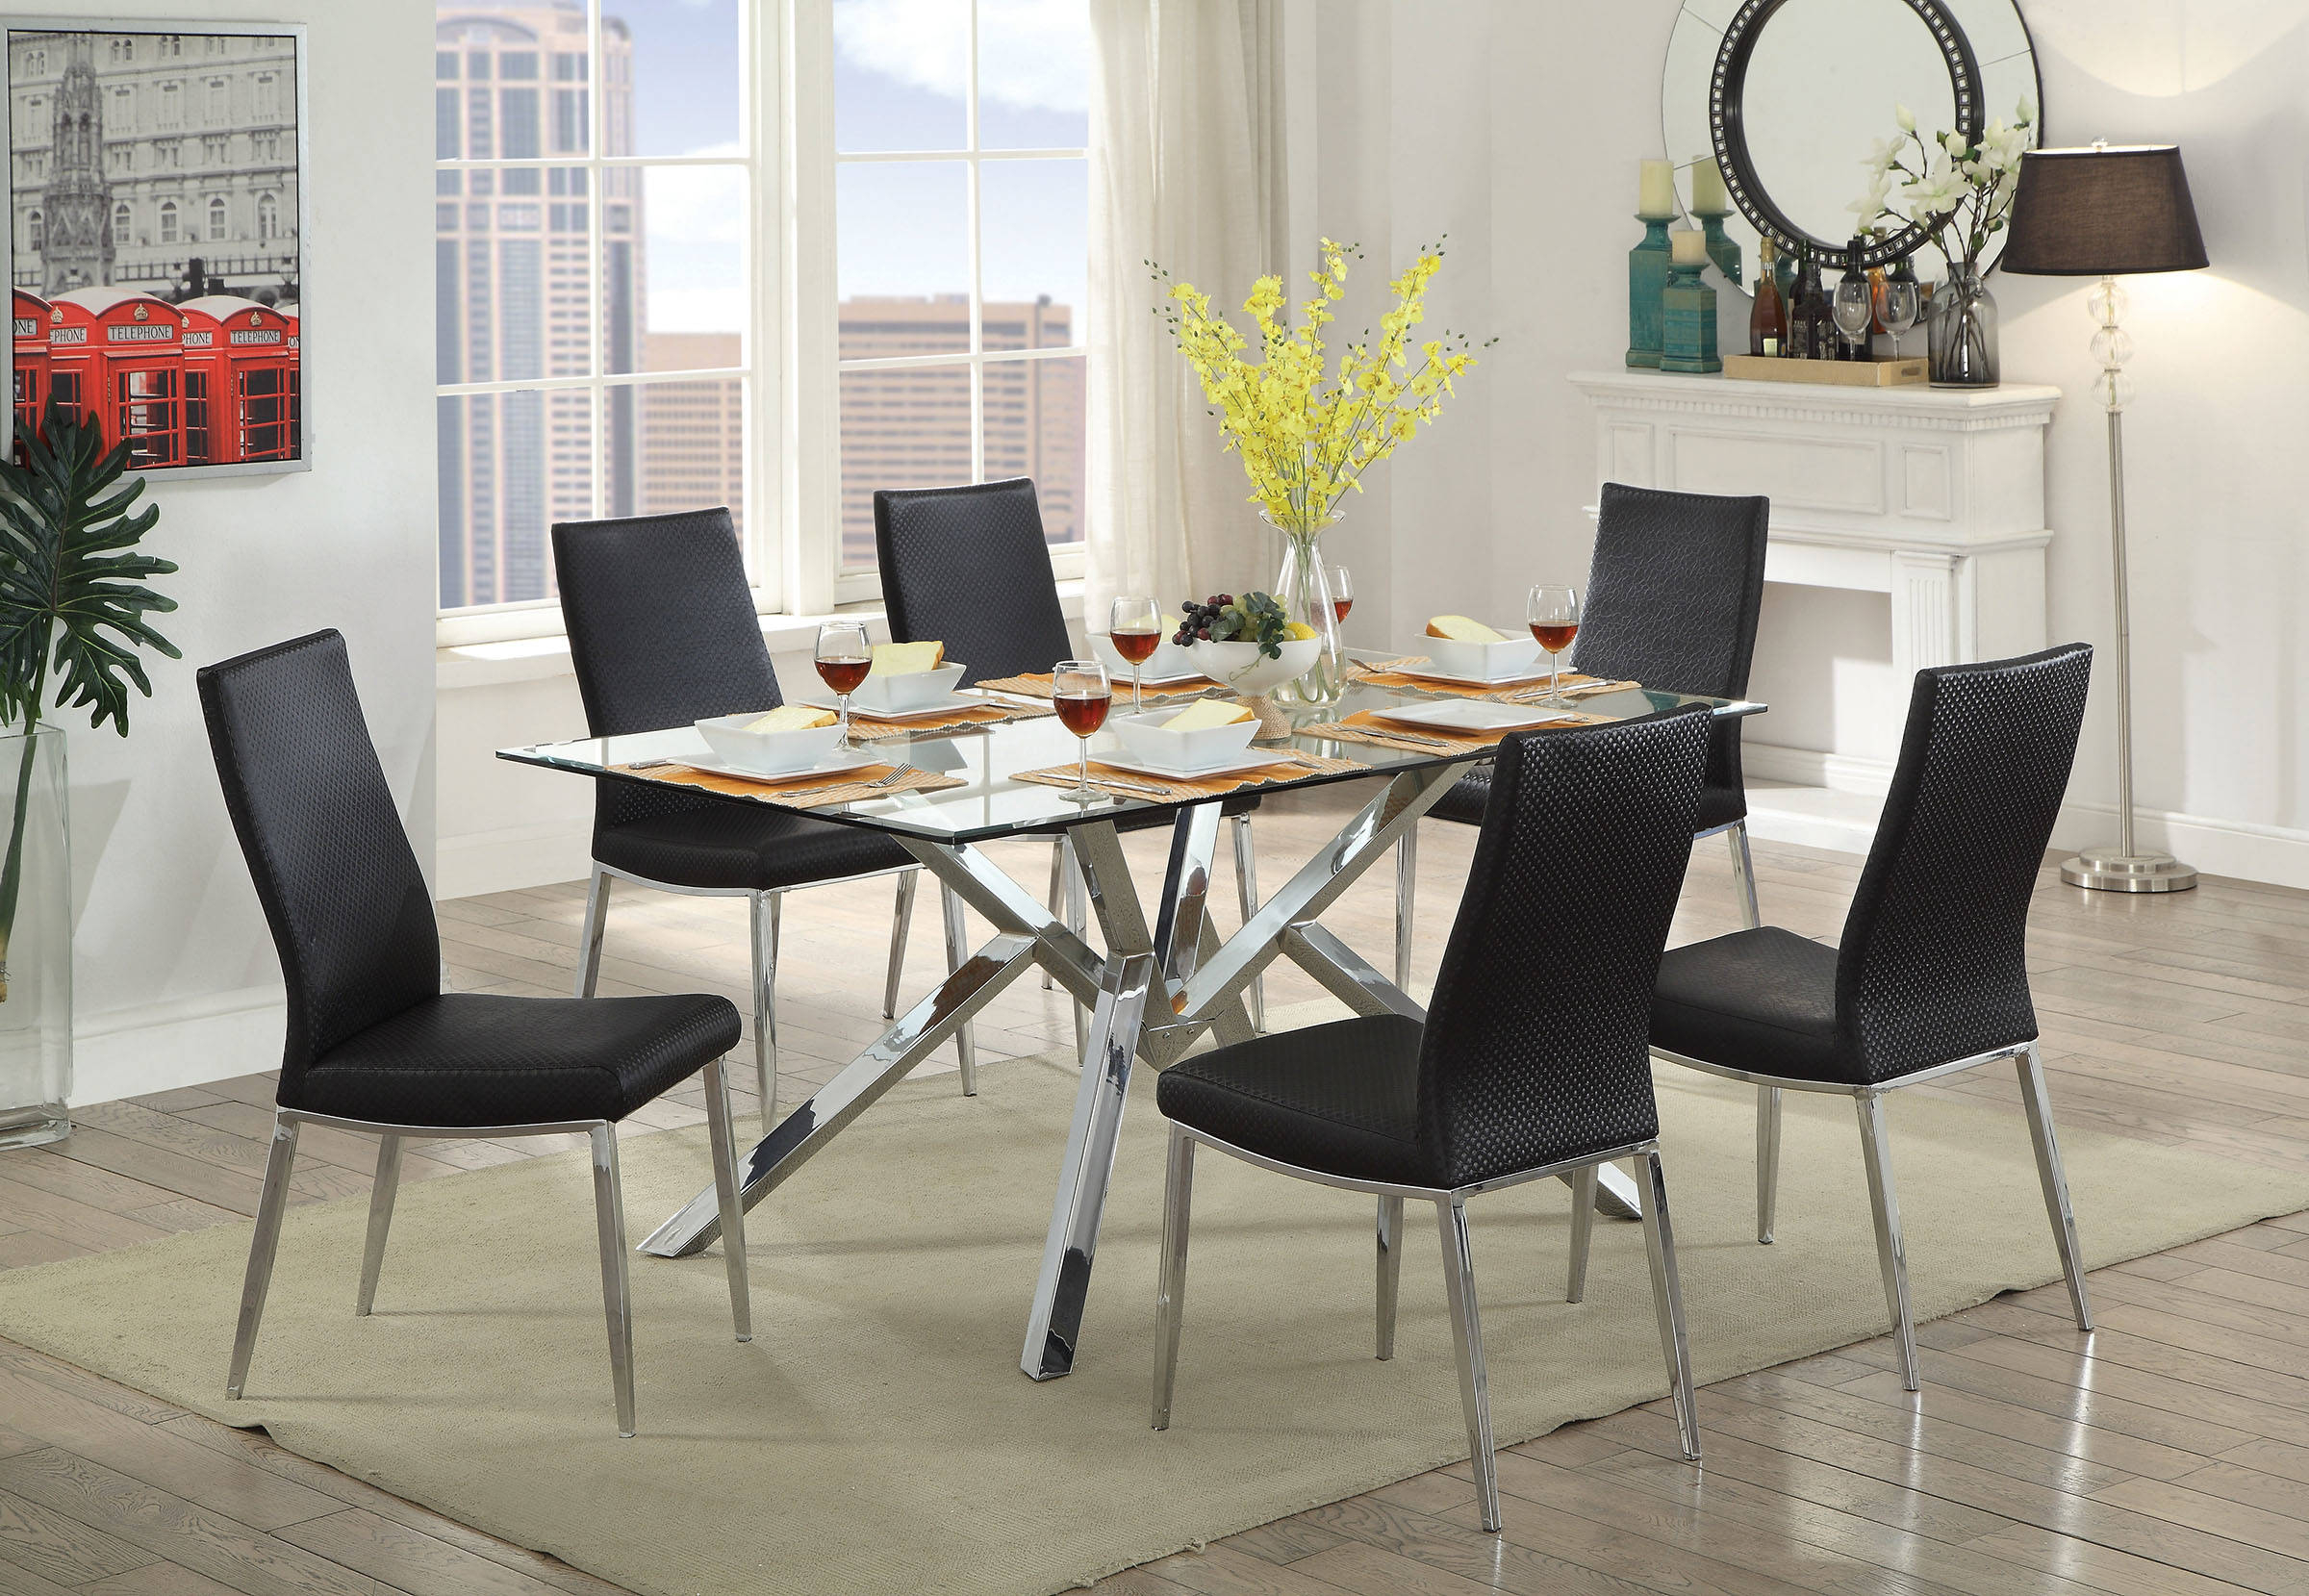 Furniture Of America Grace Black 7pc Dining Room Set The for dimensions 2400 X 1659